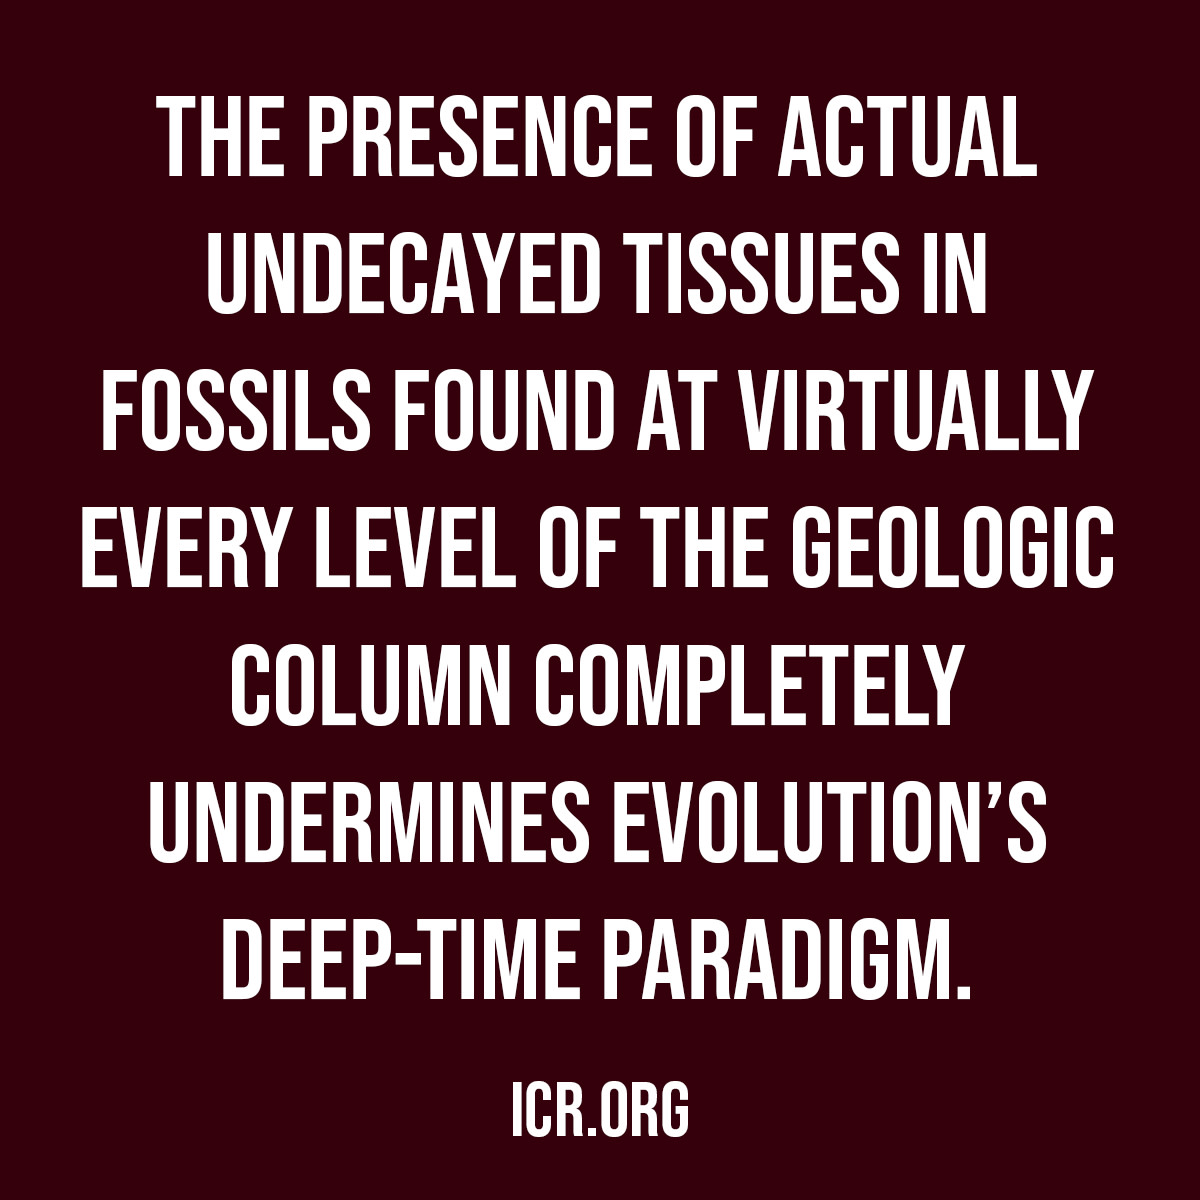 ⛰️ The presence of actual undecayed tissues in fossils found at virtually every level of the geologic column completely undermines evolution's deep-time paradigm. #FossilRecord #QuoteOfTheDay